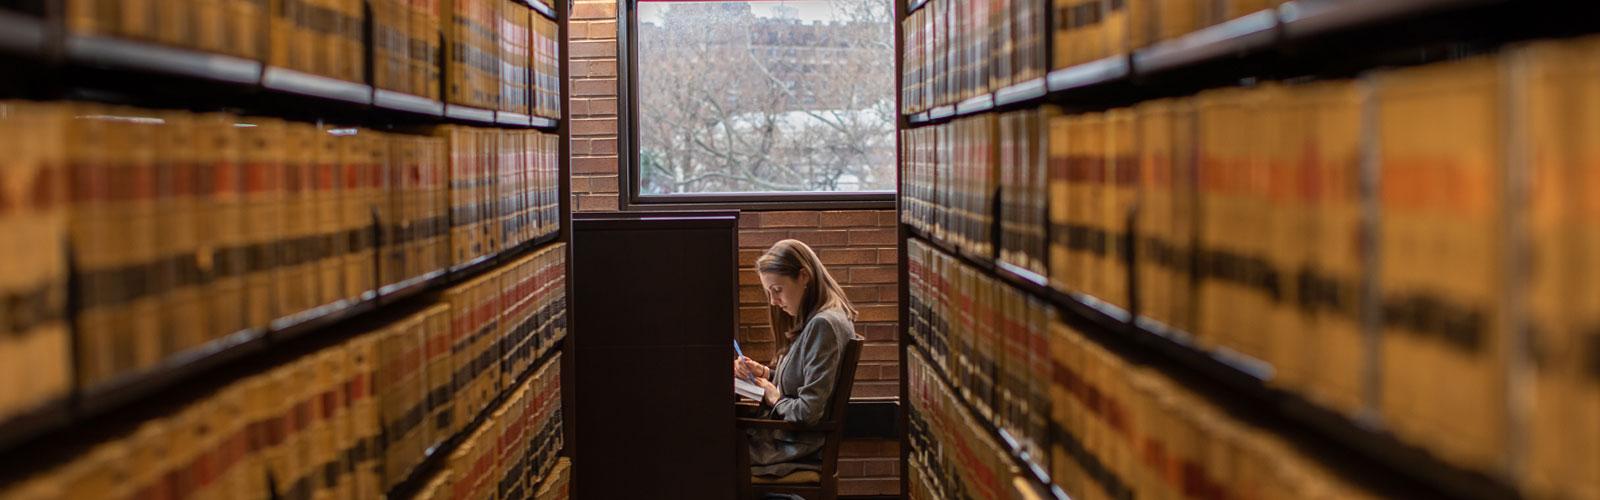 A CWRU law student sitting among the stacks of law journals in CWRU law library